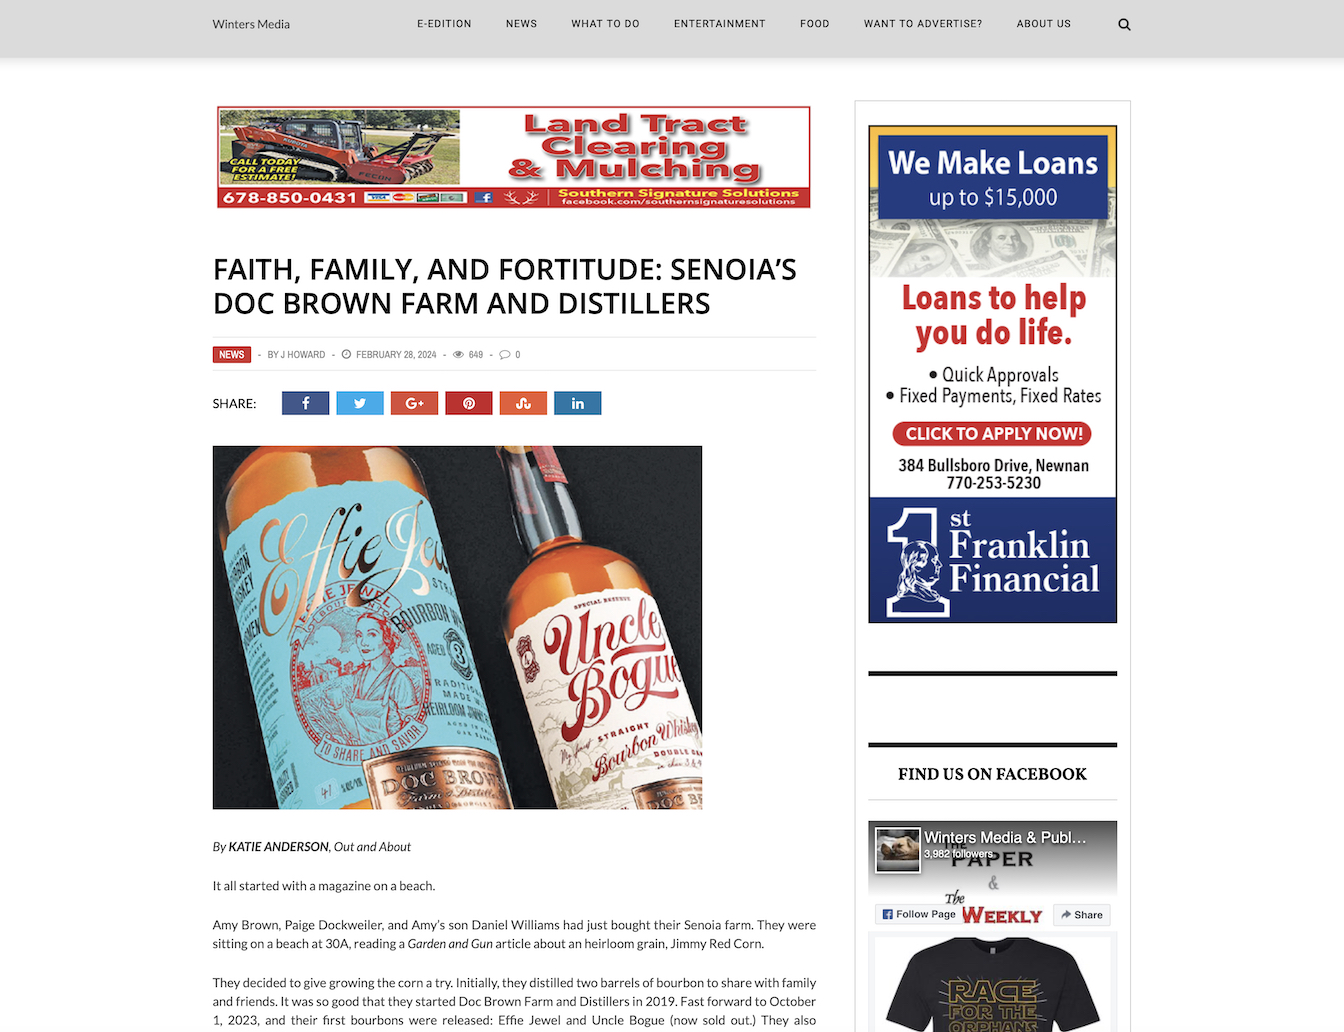 Doc Brown Farm & Distillers featured on the Winters Media website